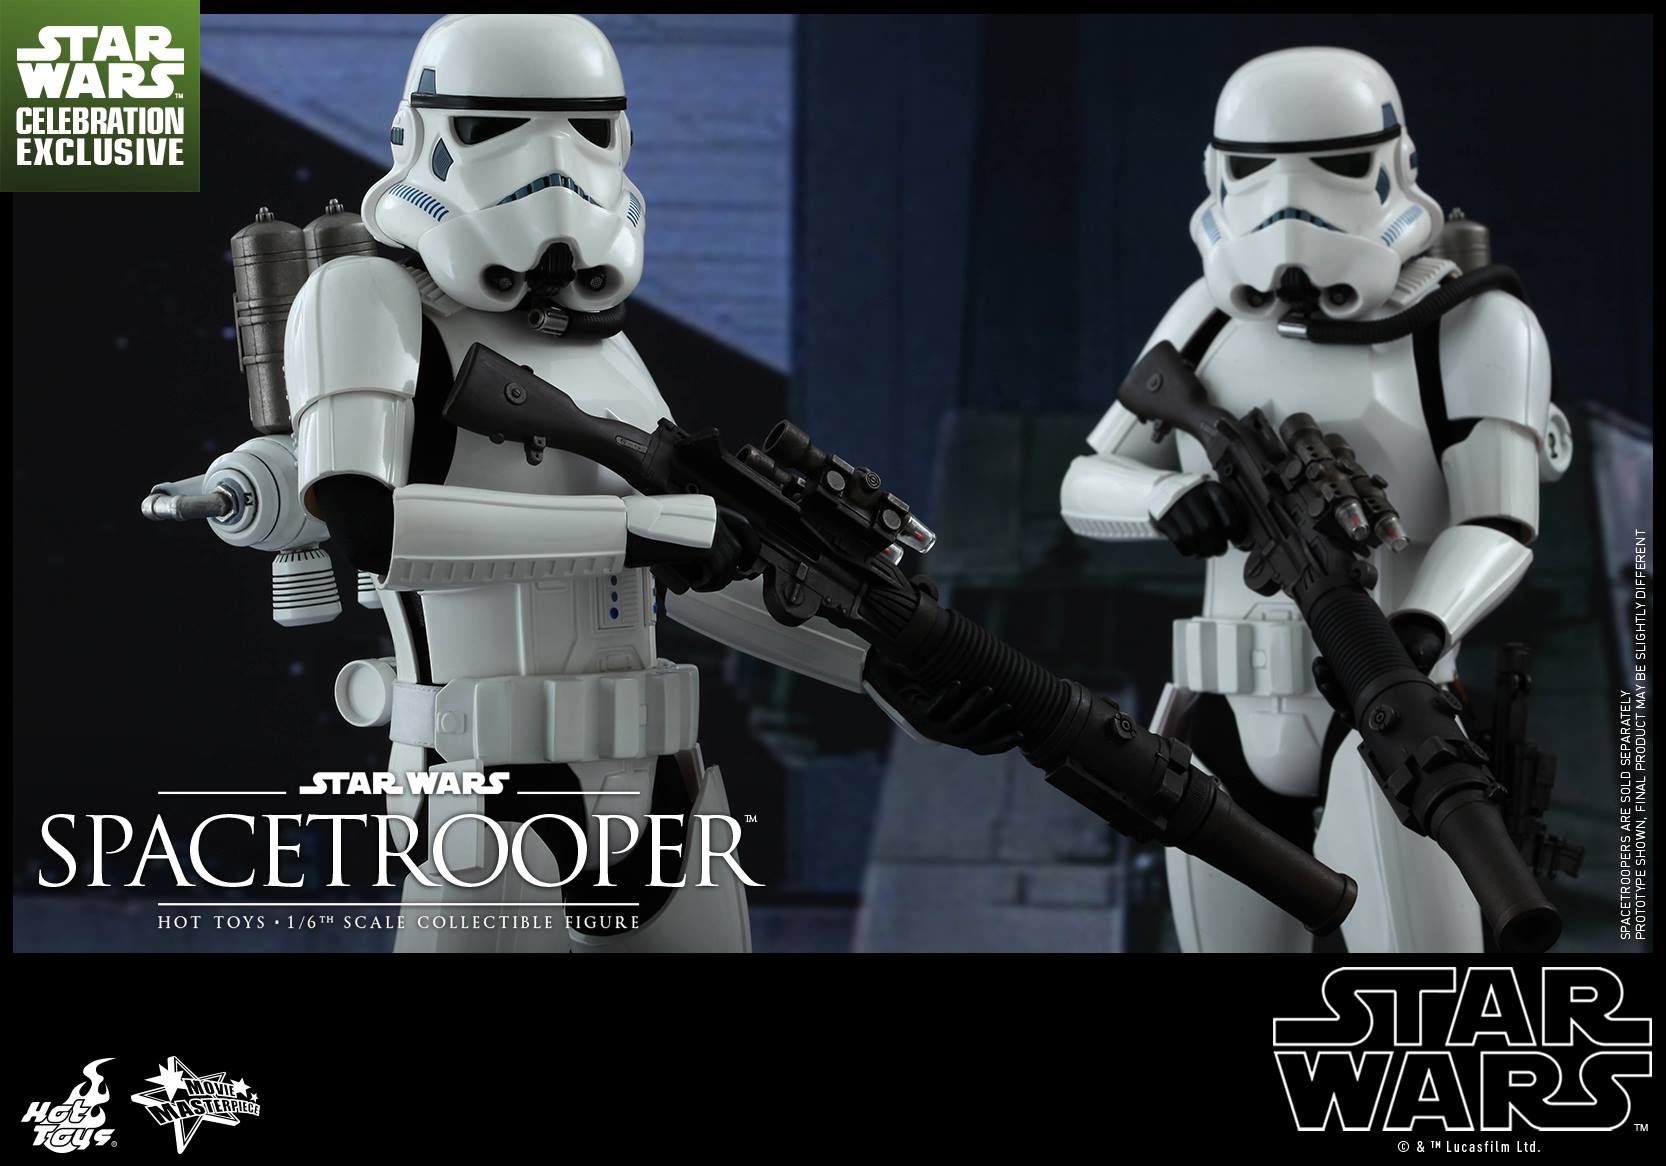 HOT TOYS - Star Wars: Episode IV A New Hope - Spacetrooper 319139102